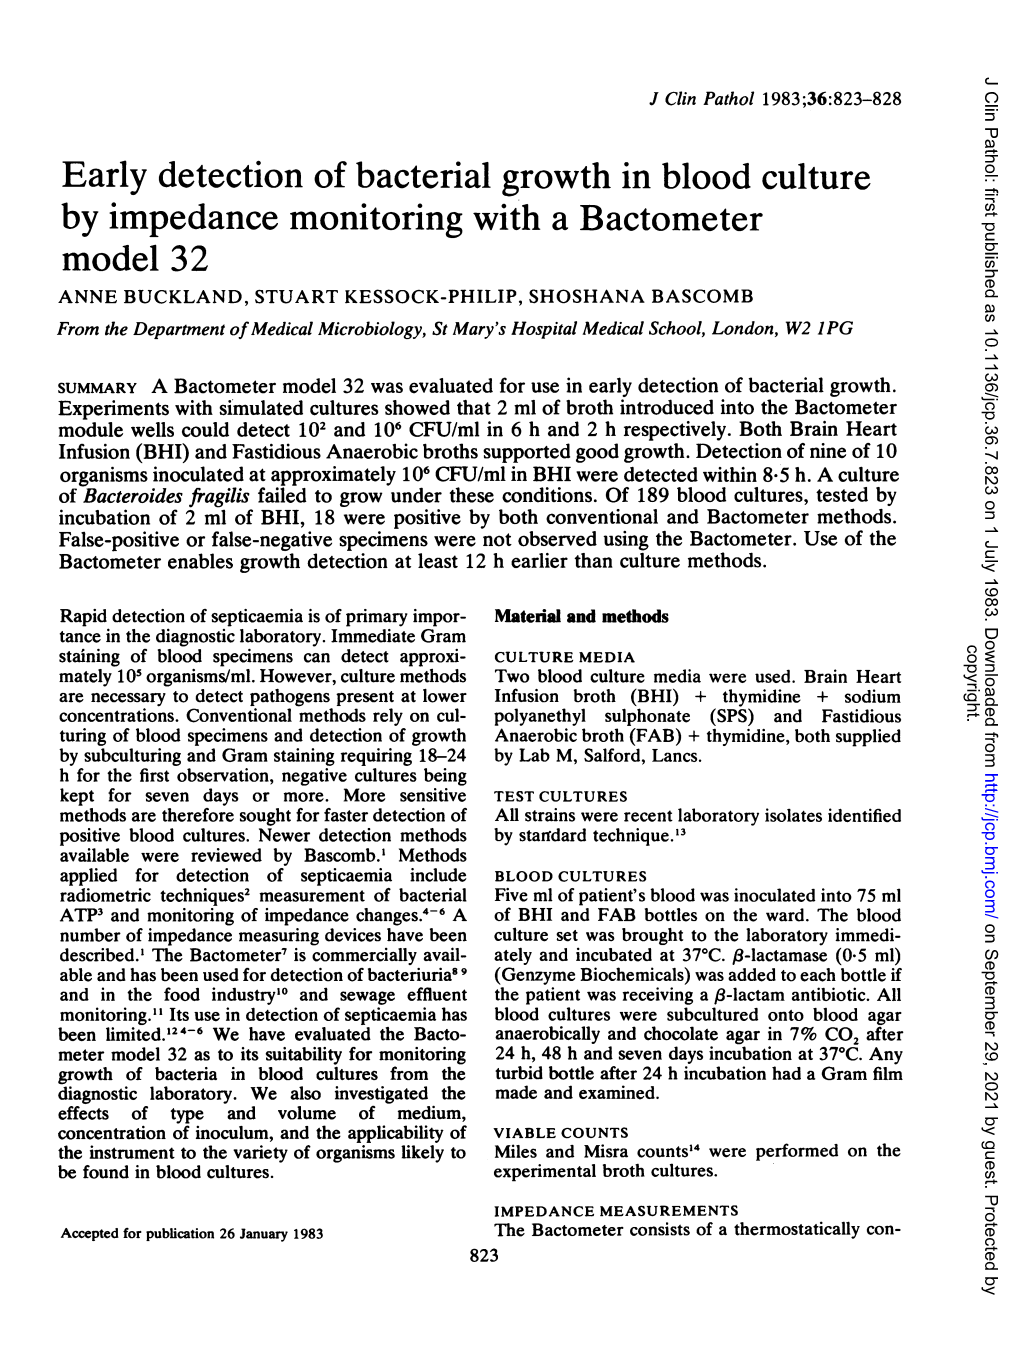 Early Detection of Bacterial Growth in Blood Culture by Impedance Monitoring with a Bactometer